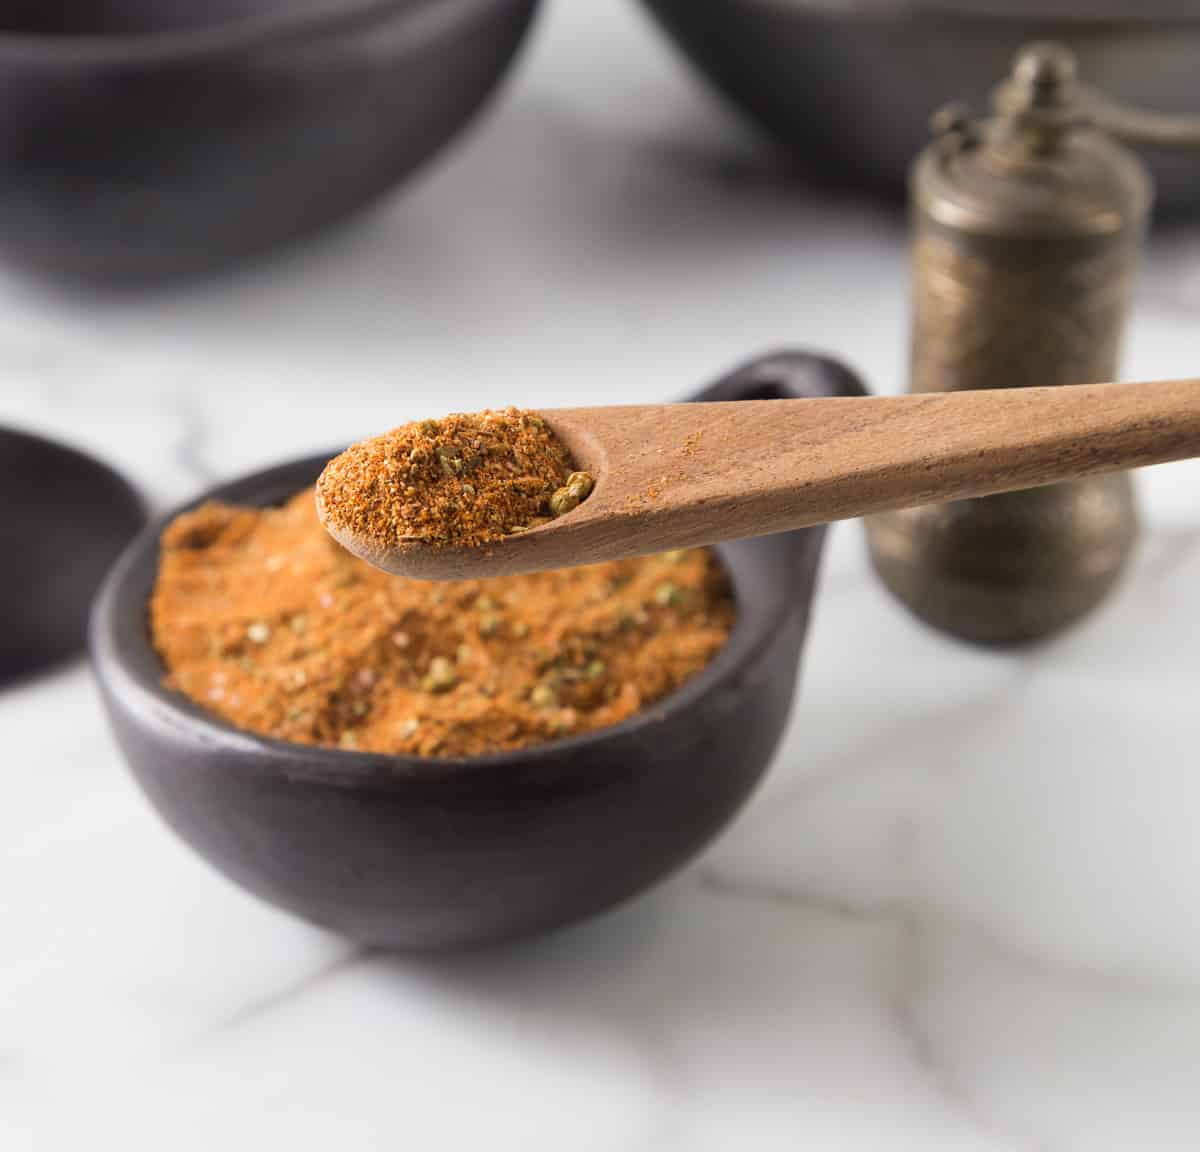 A photo of Turkish seasoning on a wooden spoon with a black bowl in the background.